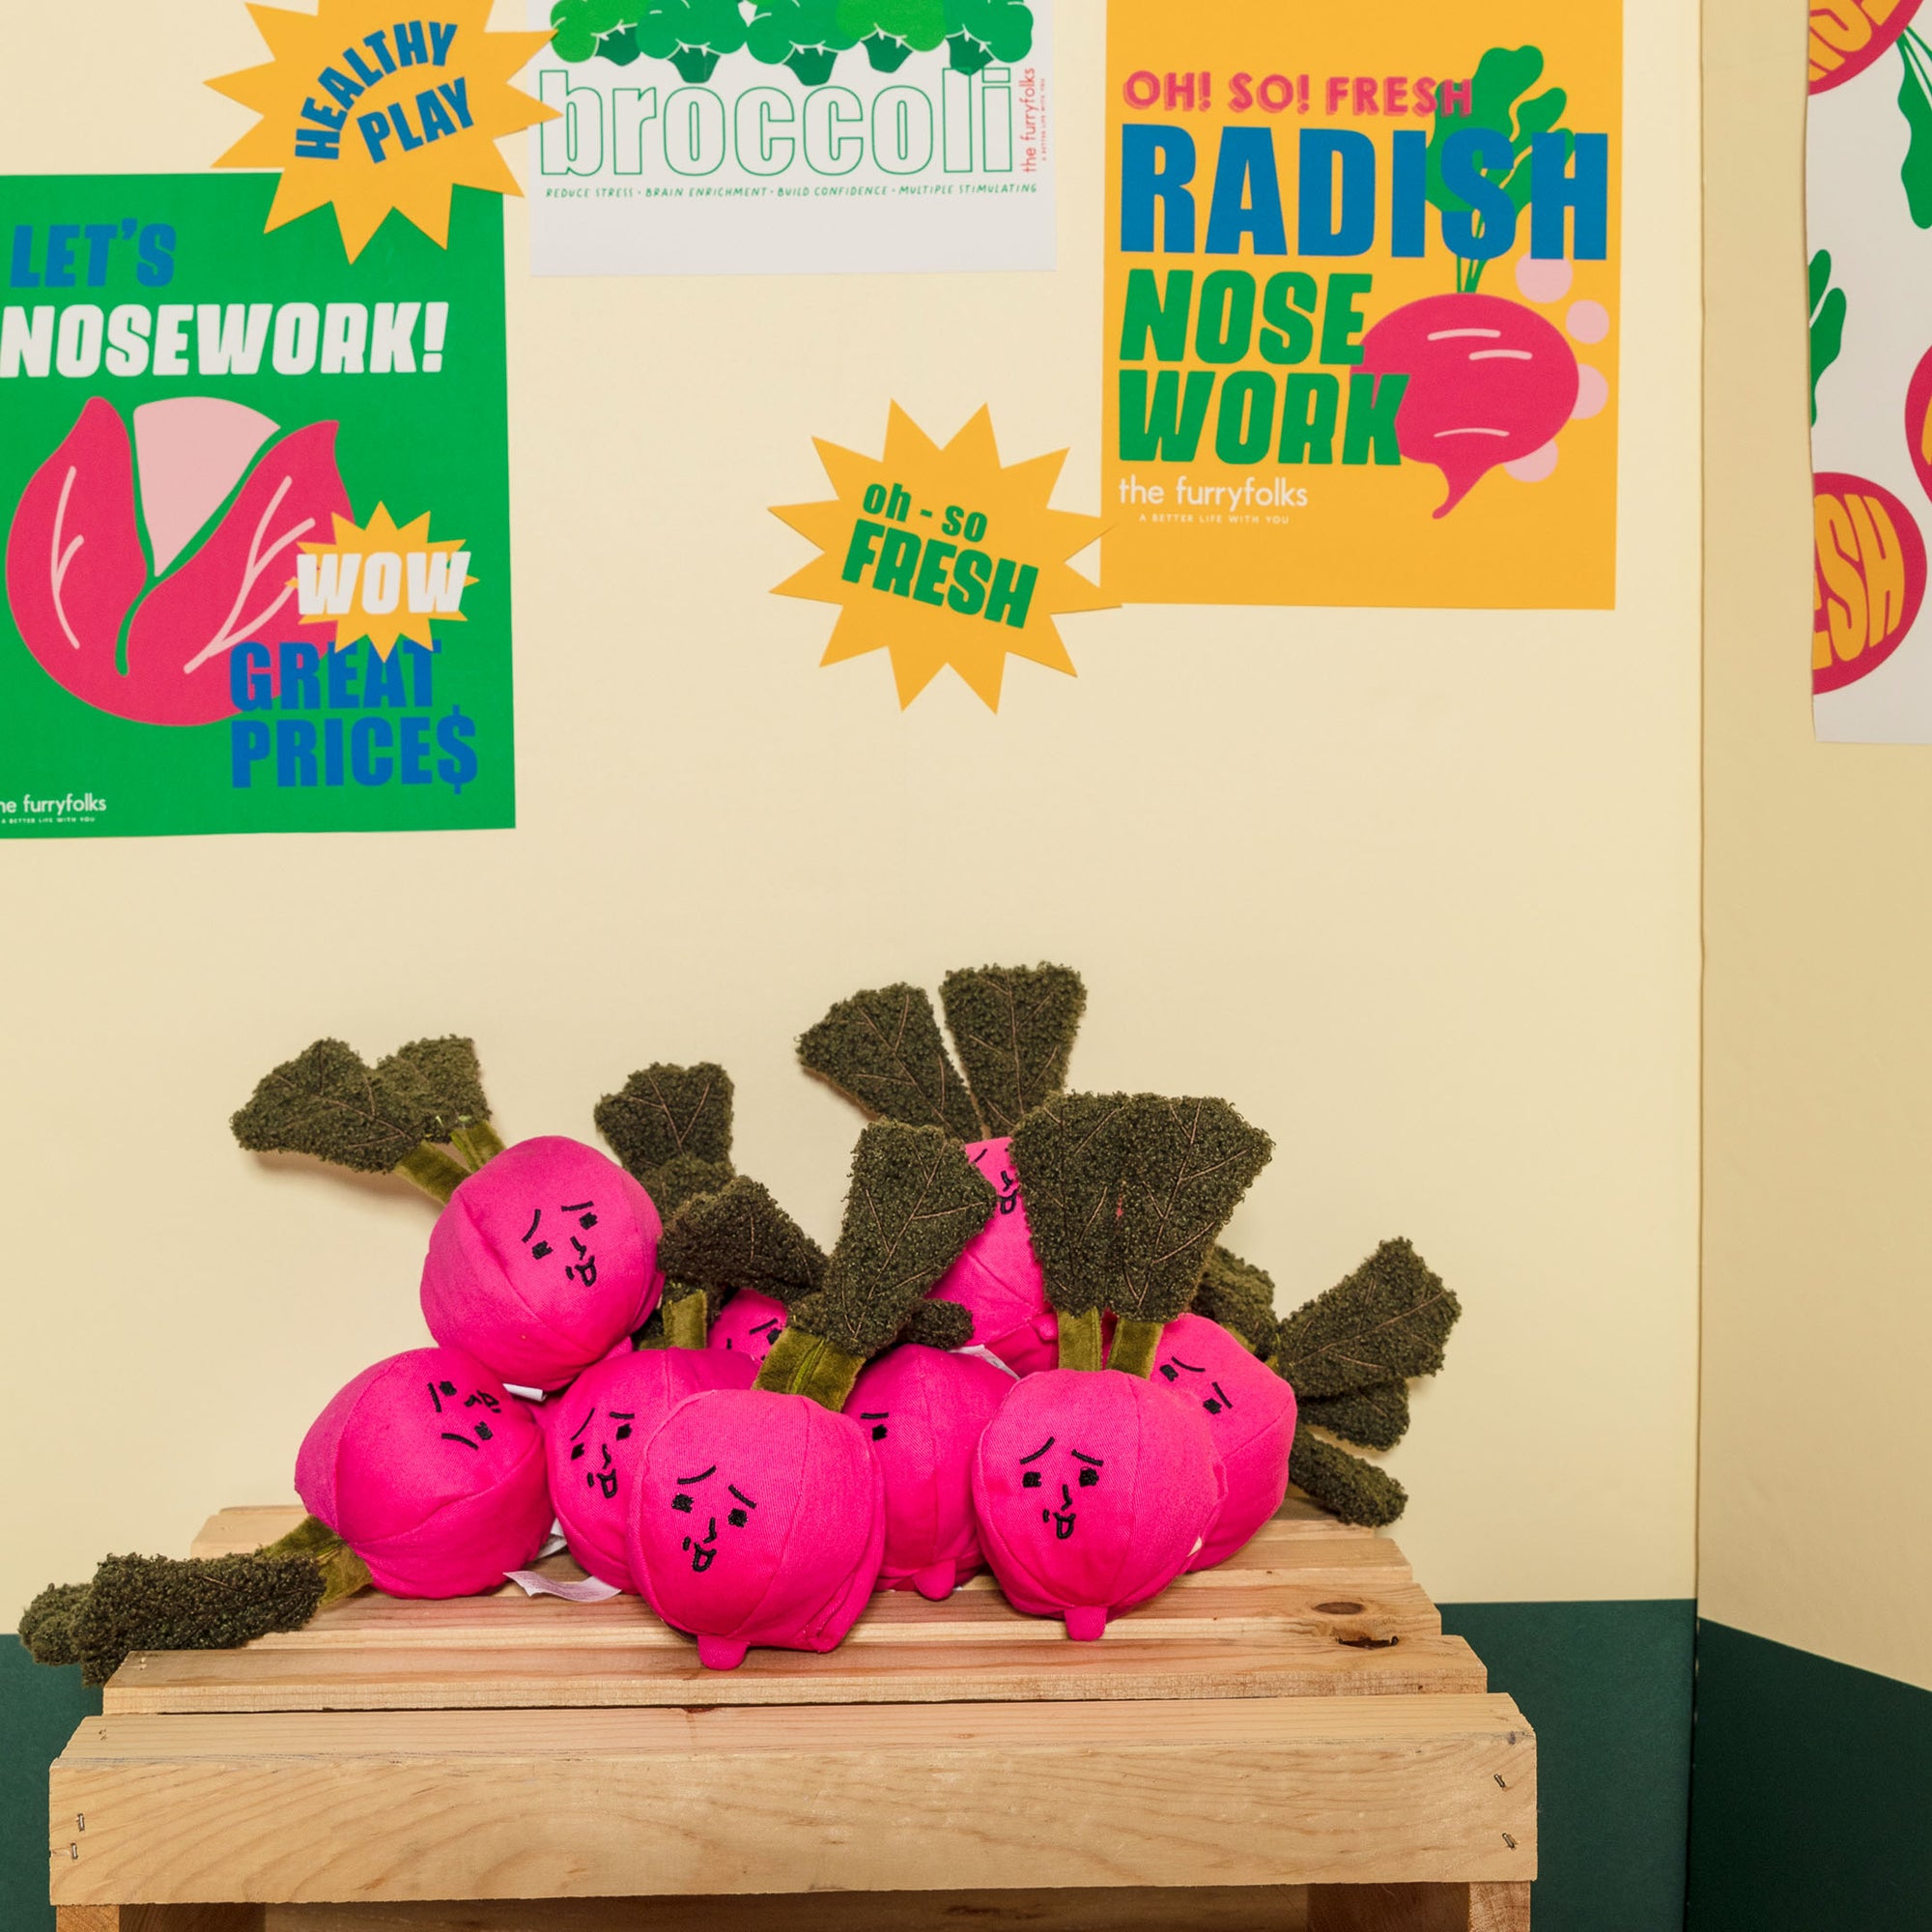 The image shows a playful setup with pink radish-shaped dog toys on a wooden stand against a backdrop of colorful posters. The posters advertise nosework toys with catchy phrases like "Healthy Play" and "Oh So Fresh". This scene is likely part of a pet store or event promoting interactive and enriching activities for dogs.